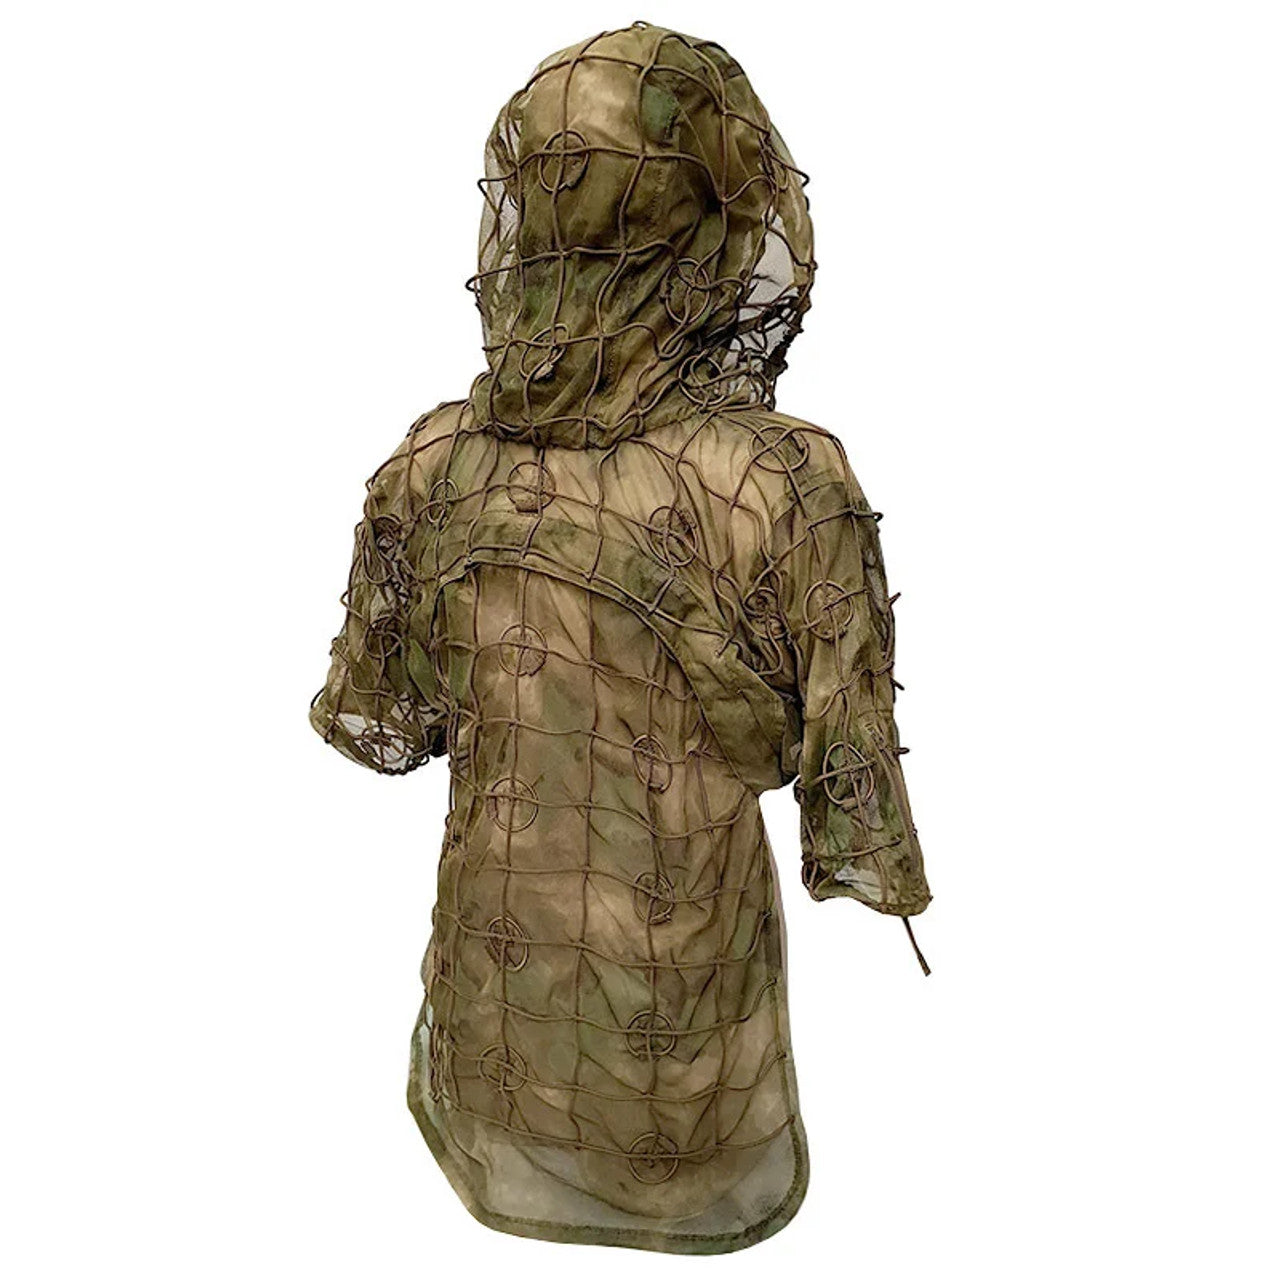 The Yowie is a lightweight Ghillie Base made from Noseeum mesh, which provides a highly breathable base with low water retention. www.defenceqstore.com.au